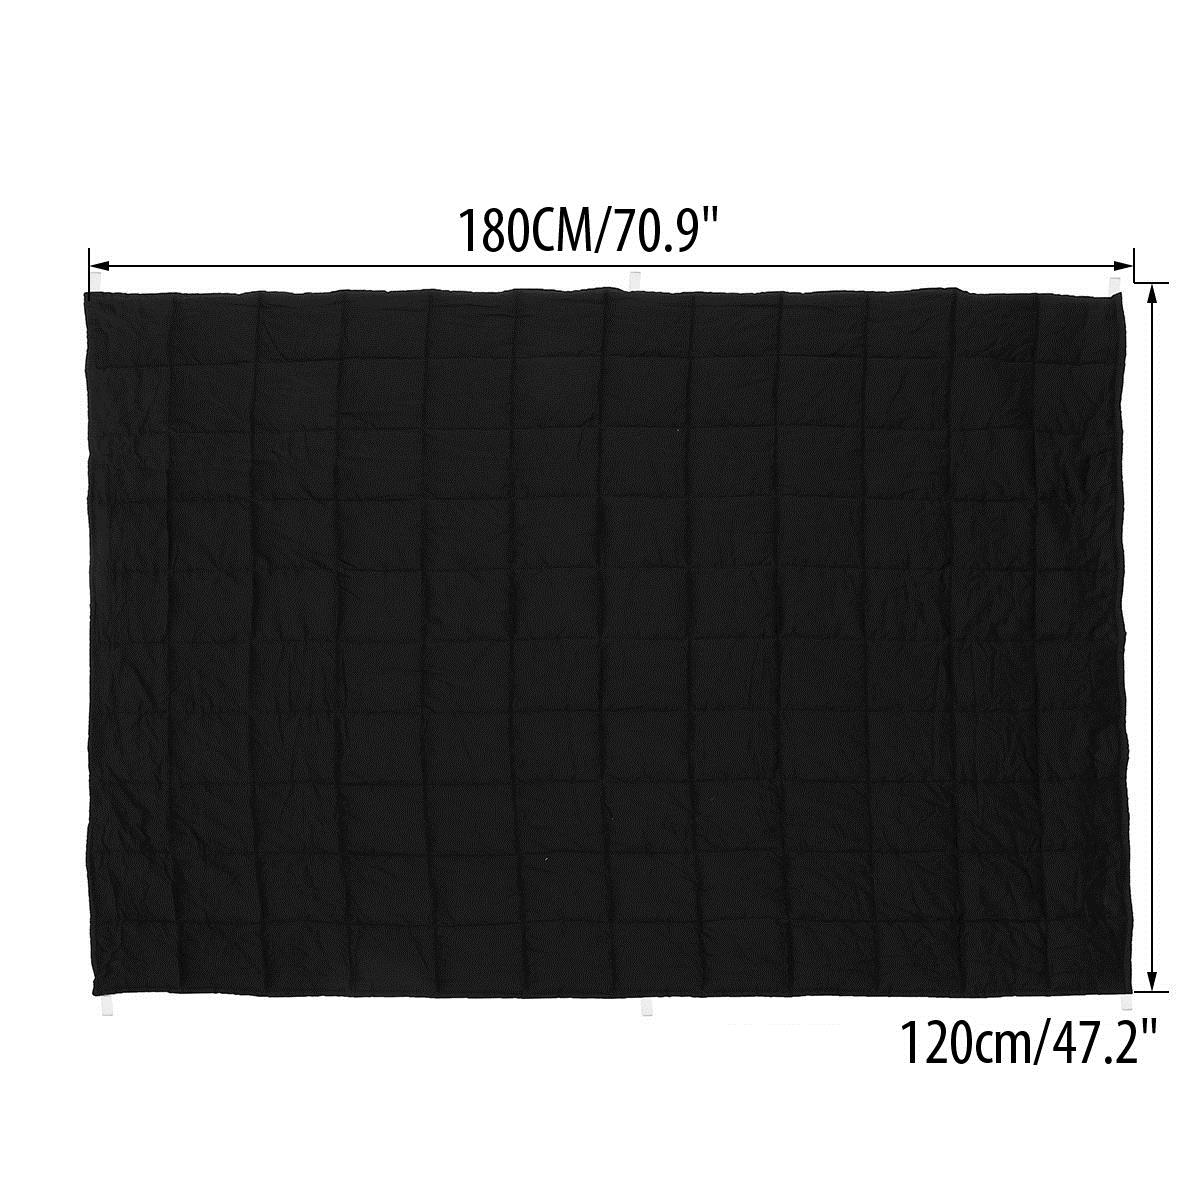 120x180CM-Black-Grey-Weighted-Blanket-Cotton-79115kg-Heavy-Sensory-Relax-Blankets-1349466